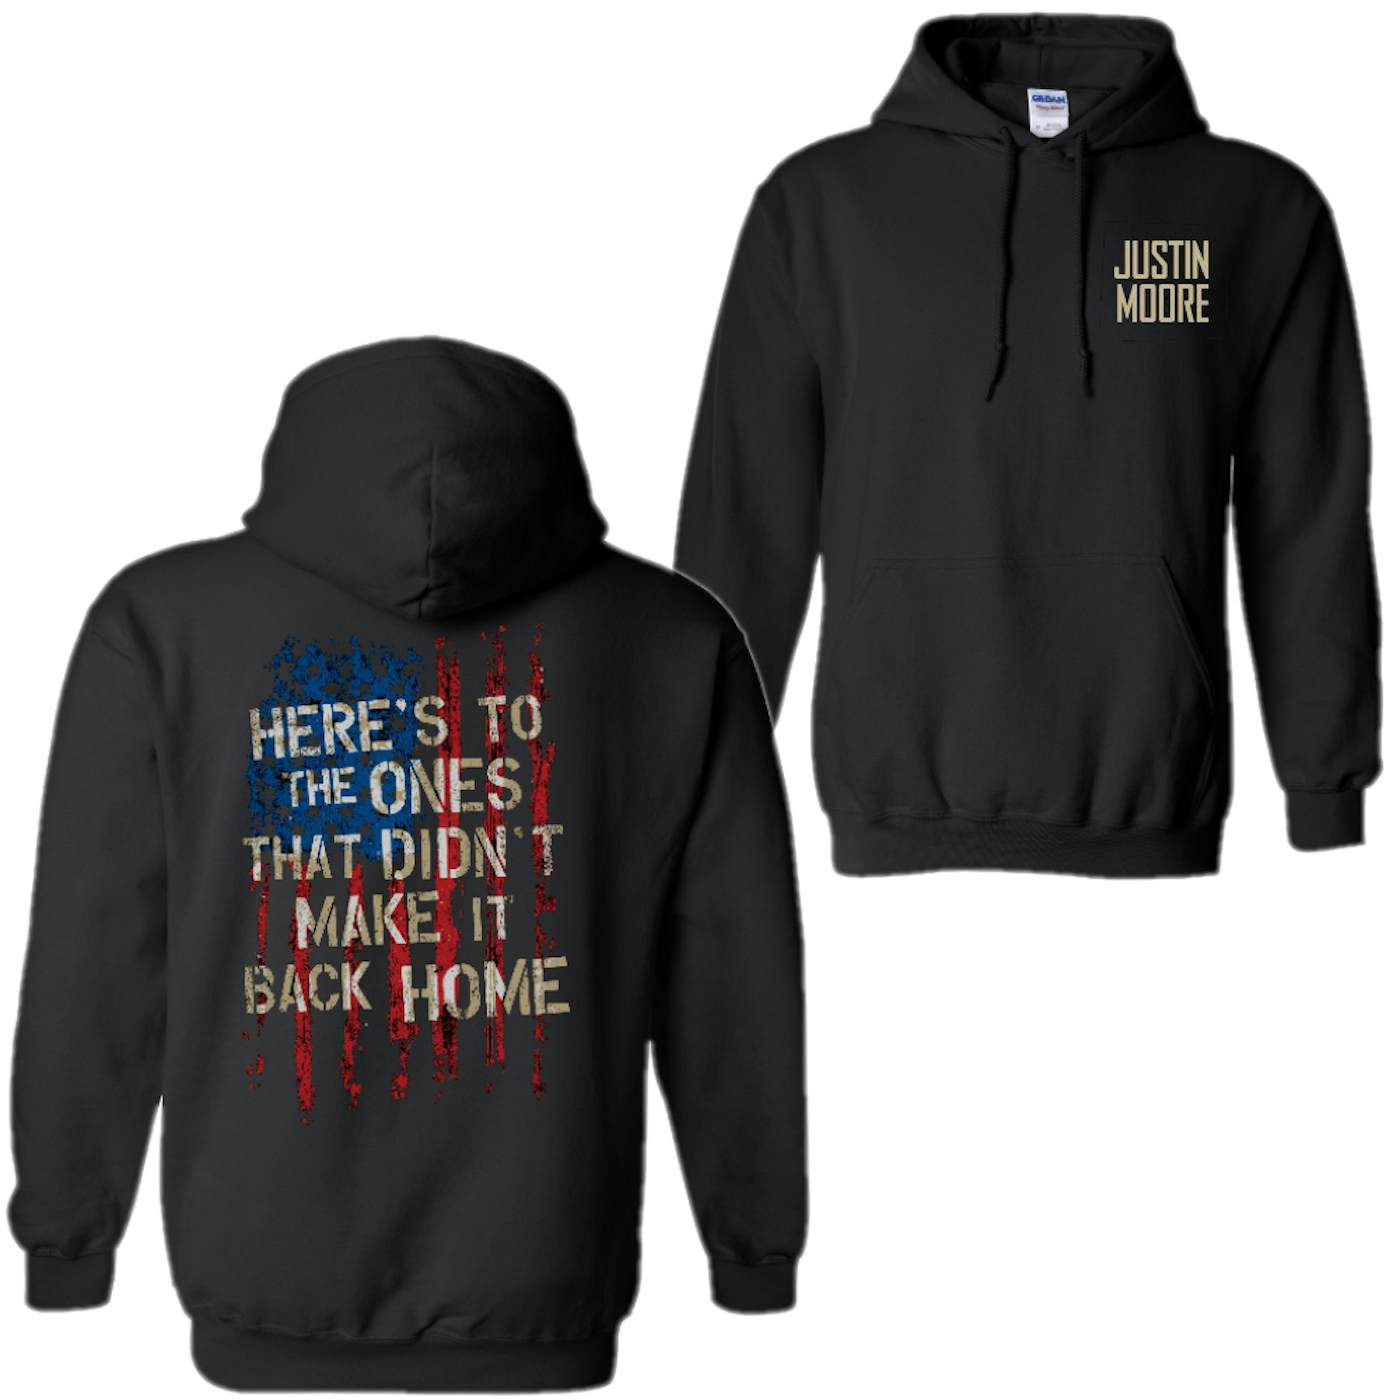 Justin Moore Here's To the Ones Black Pullover Hoodie